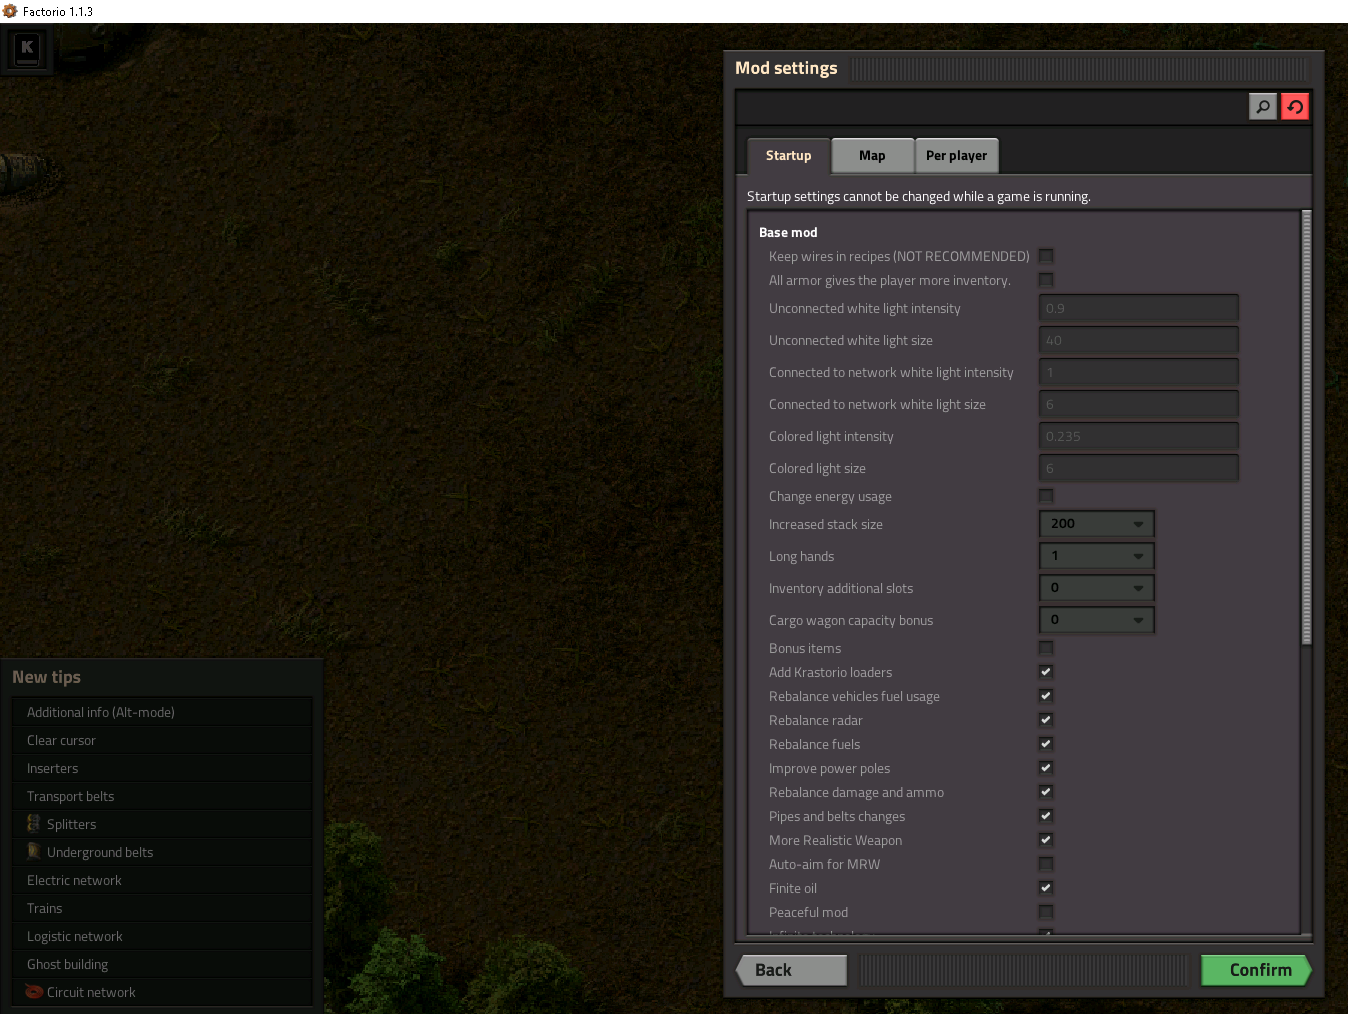 Settings dialog with many mods in 1.1.3